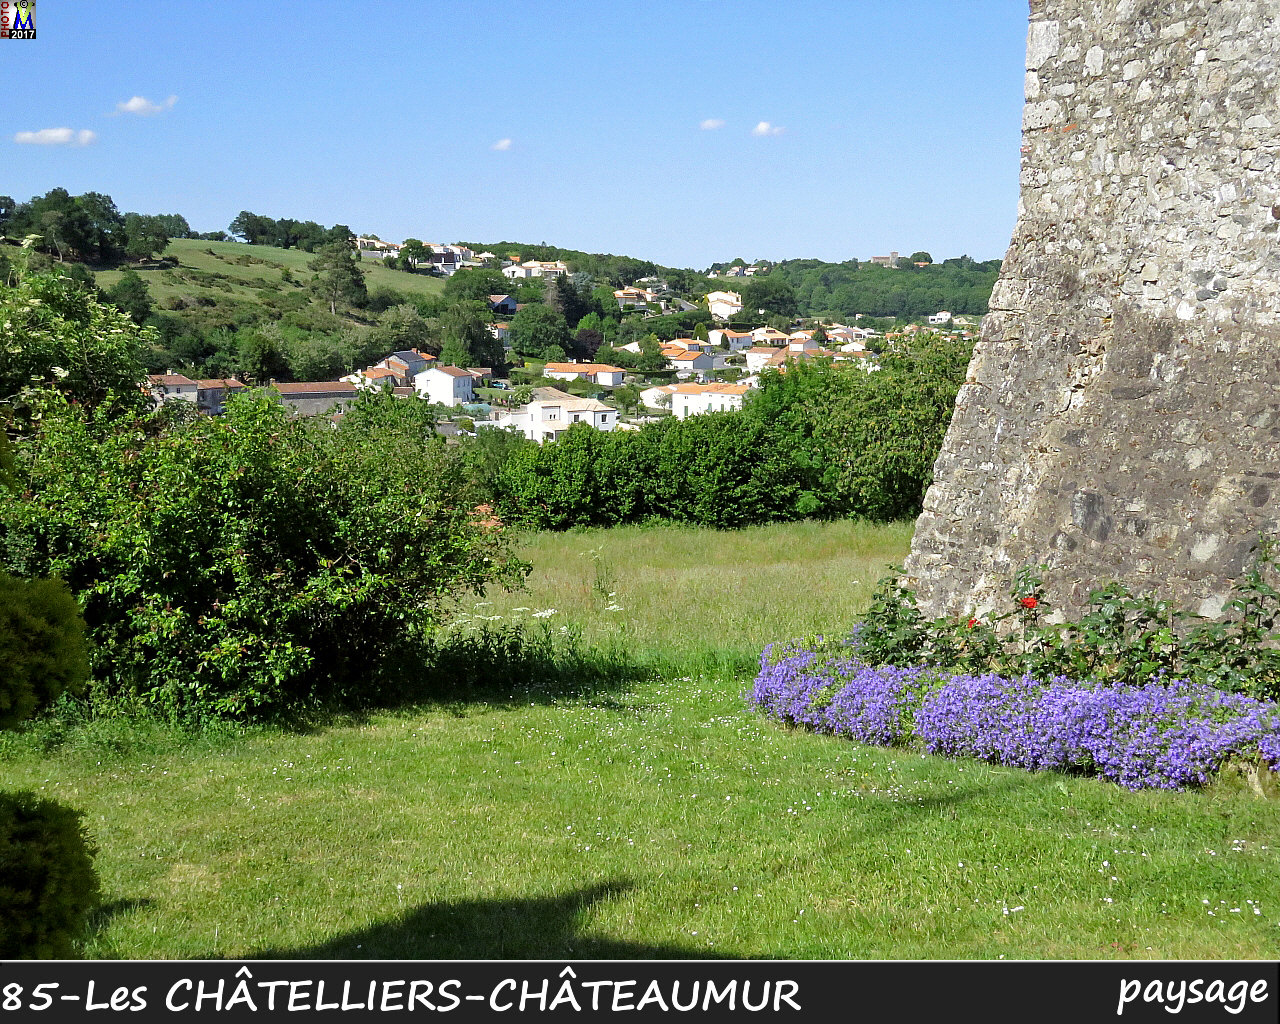 85CHATELLIERS-CHATEAUMUR_paysage_1000.jpg